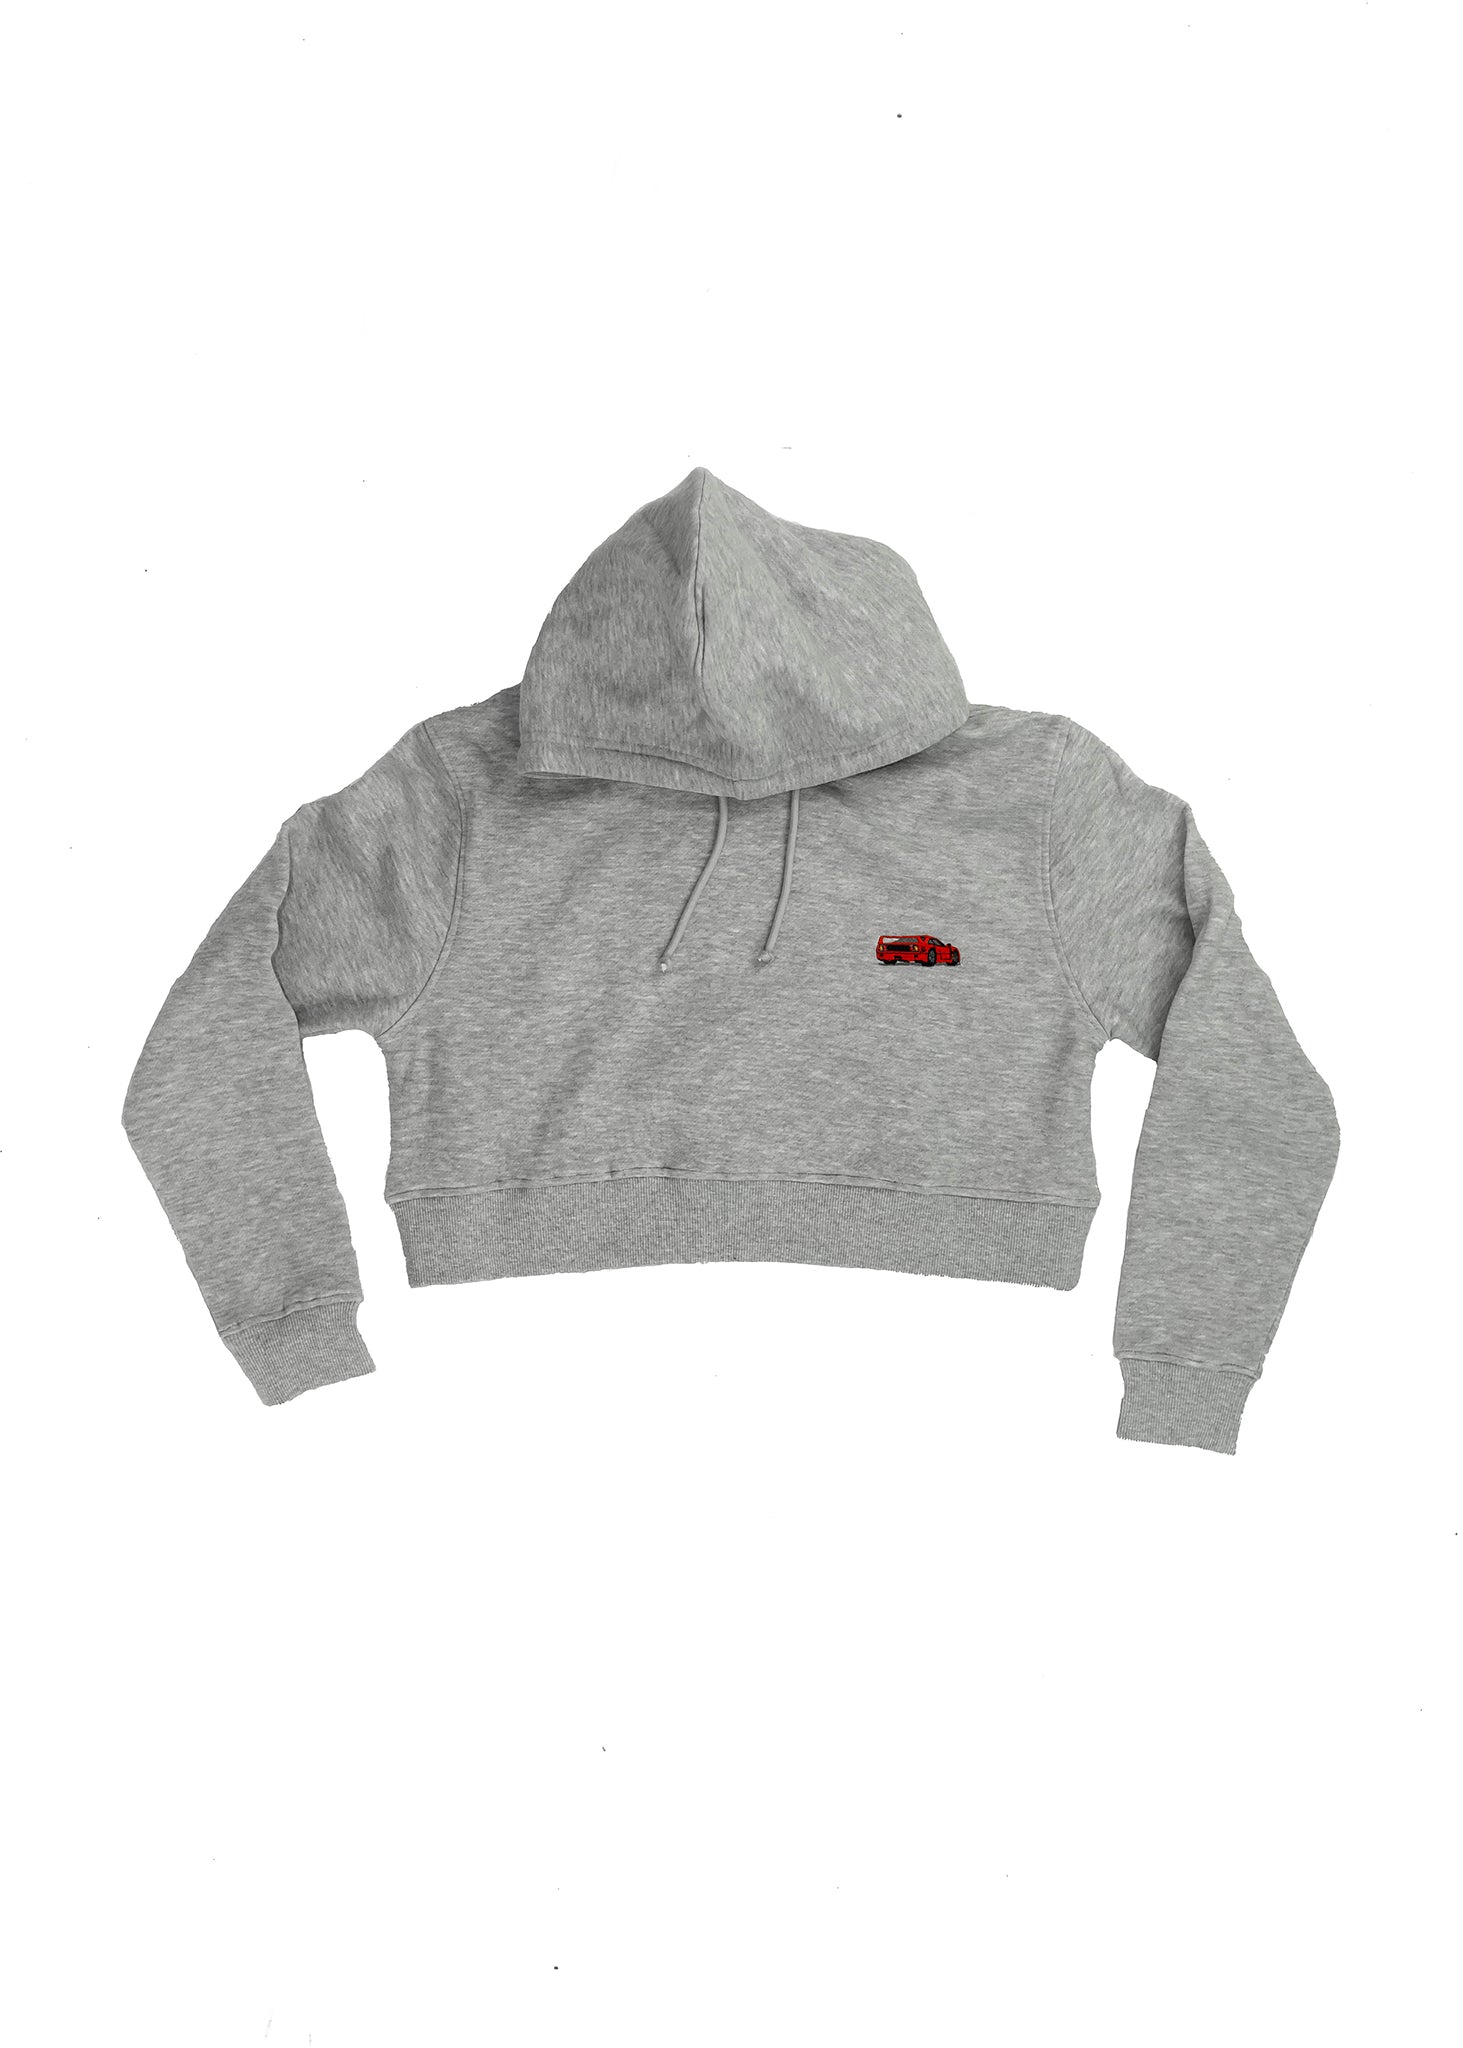 A light grey women's high quality cropped hoodie. Full size front view of the grey sweater with a red embroidered F40. Fabric composition of this cropped sweater is polyester and cotton. The material is very soft, stretchy, and non-transparent. The style of this crop hoodie is a crewneck, drawstring hoodie, hooded, long sleeve, cropped, with embroidery on the left chest.